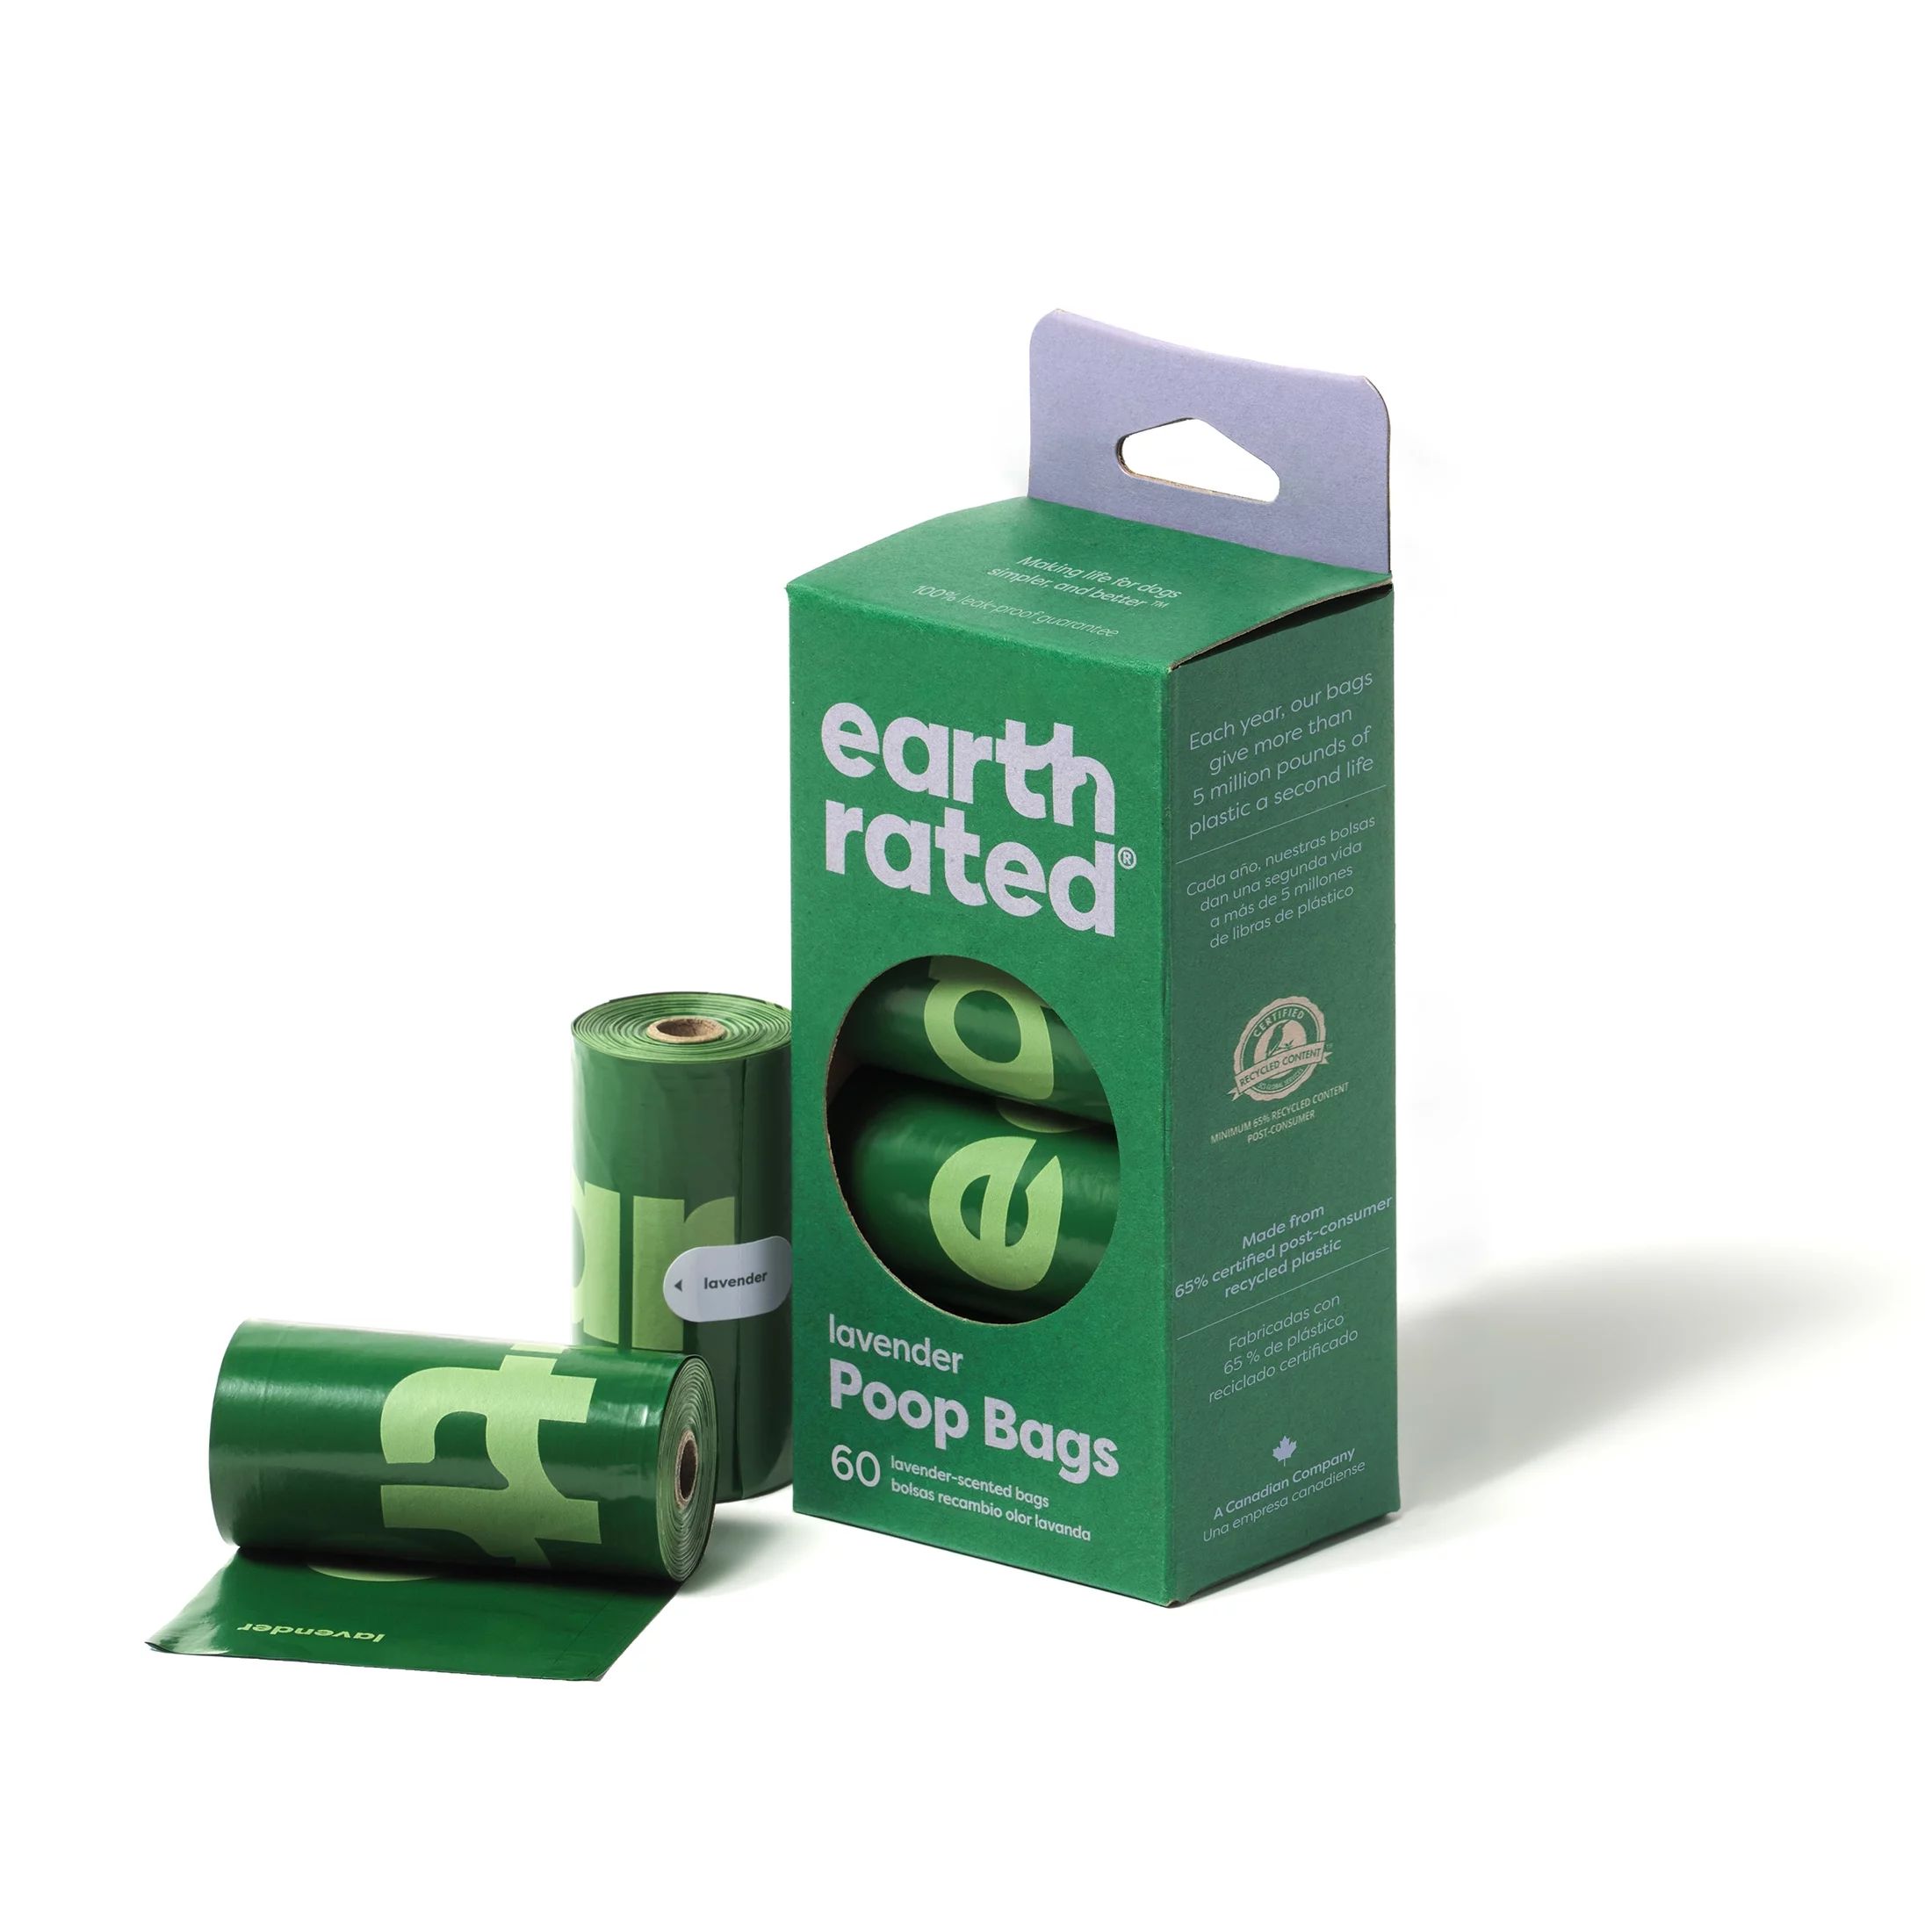 Earth Rated 60 Bags on 4 Rolls - Lavender | Walmart (US)